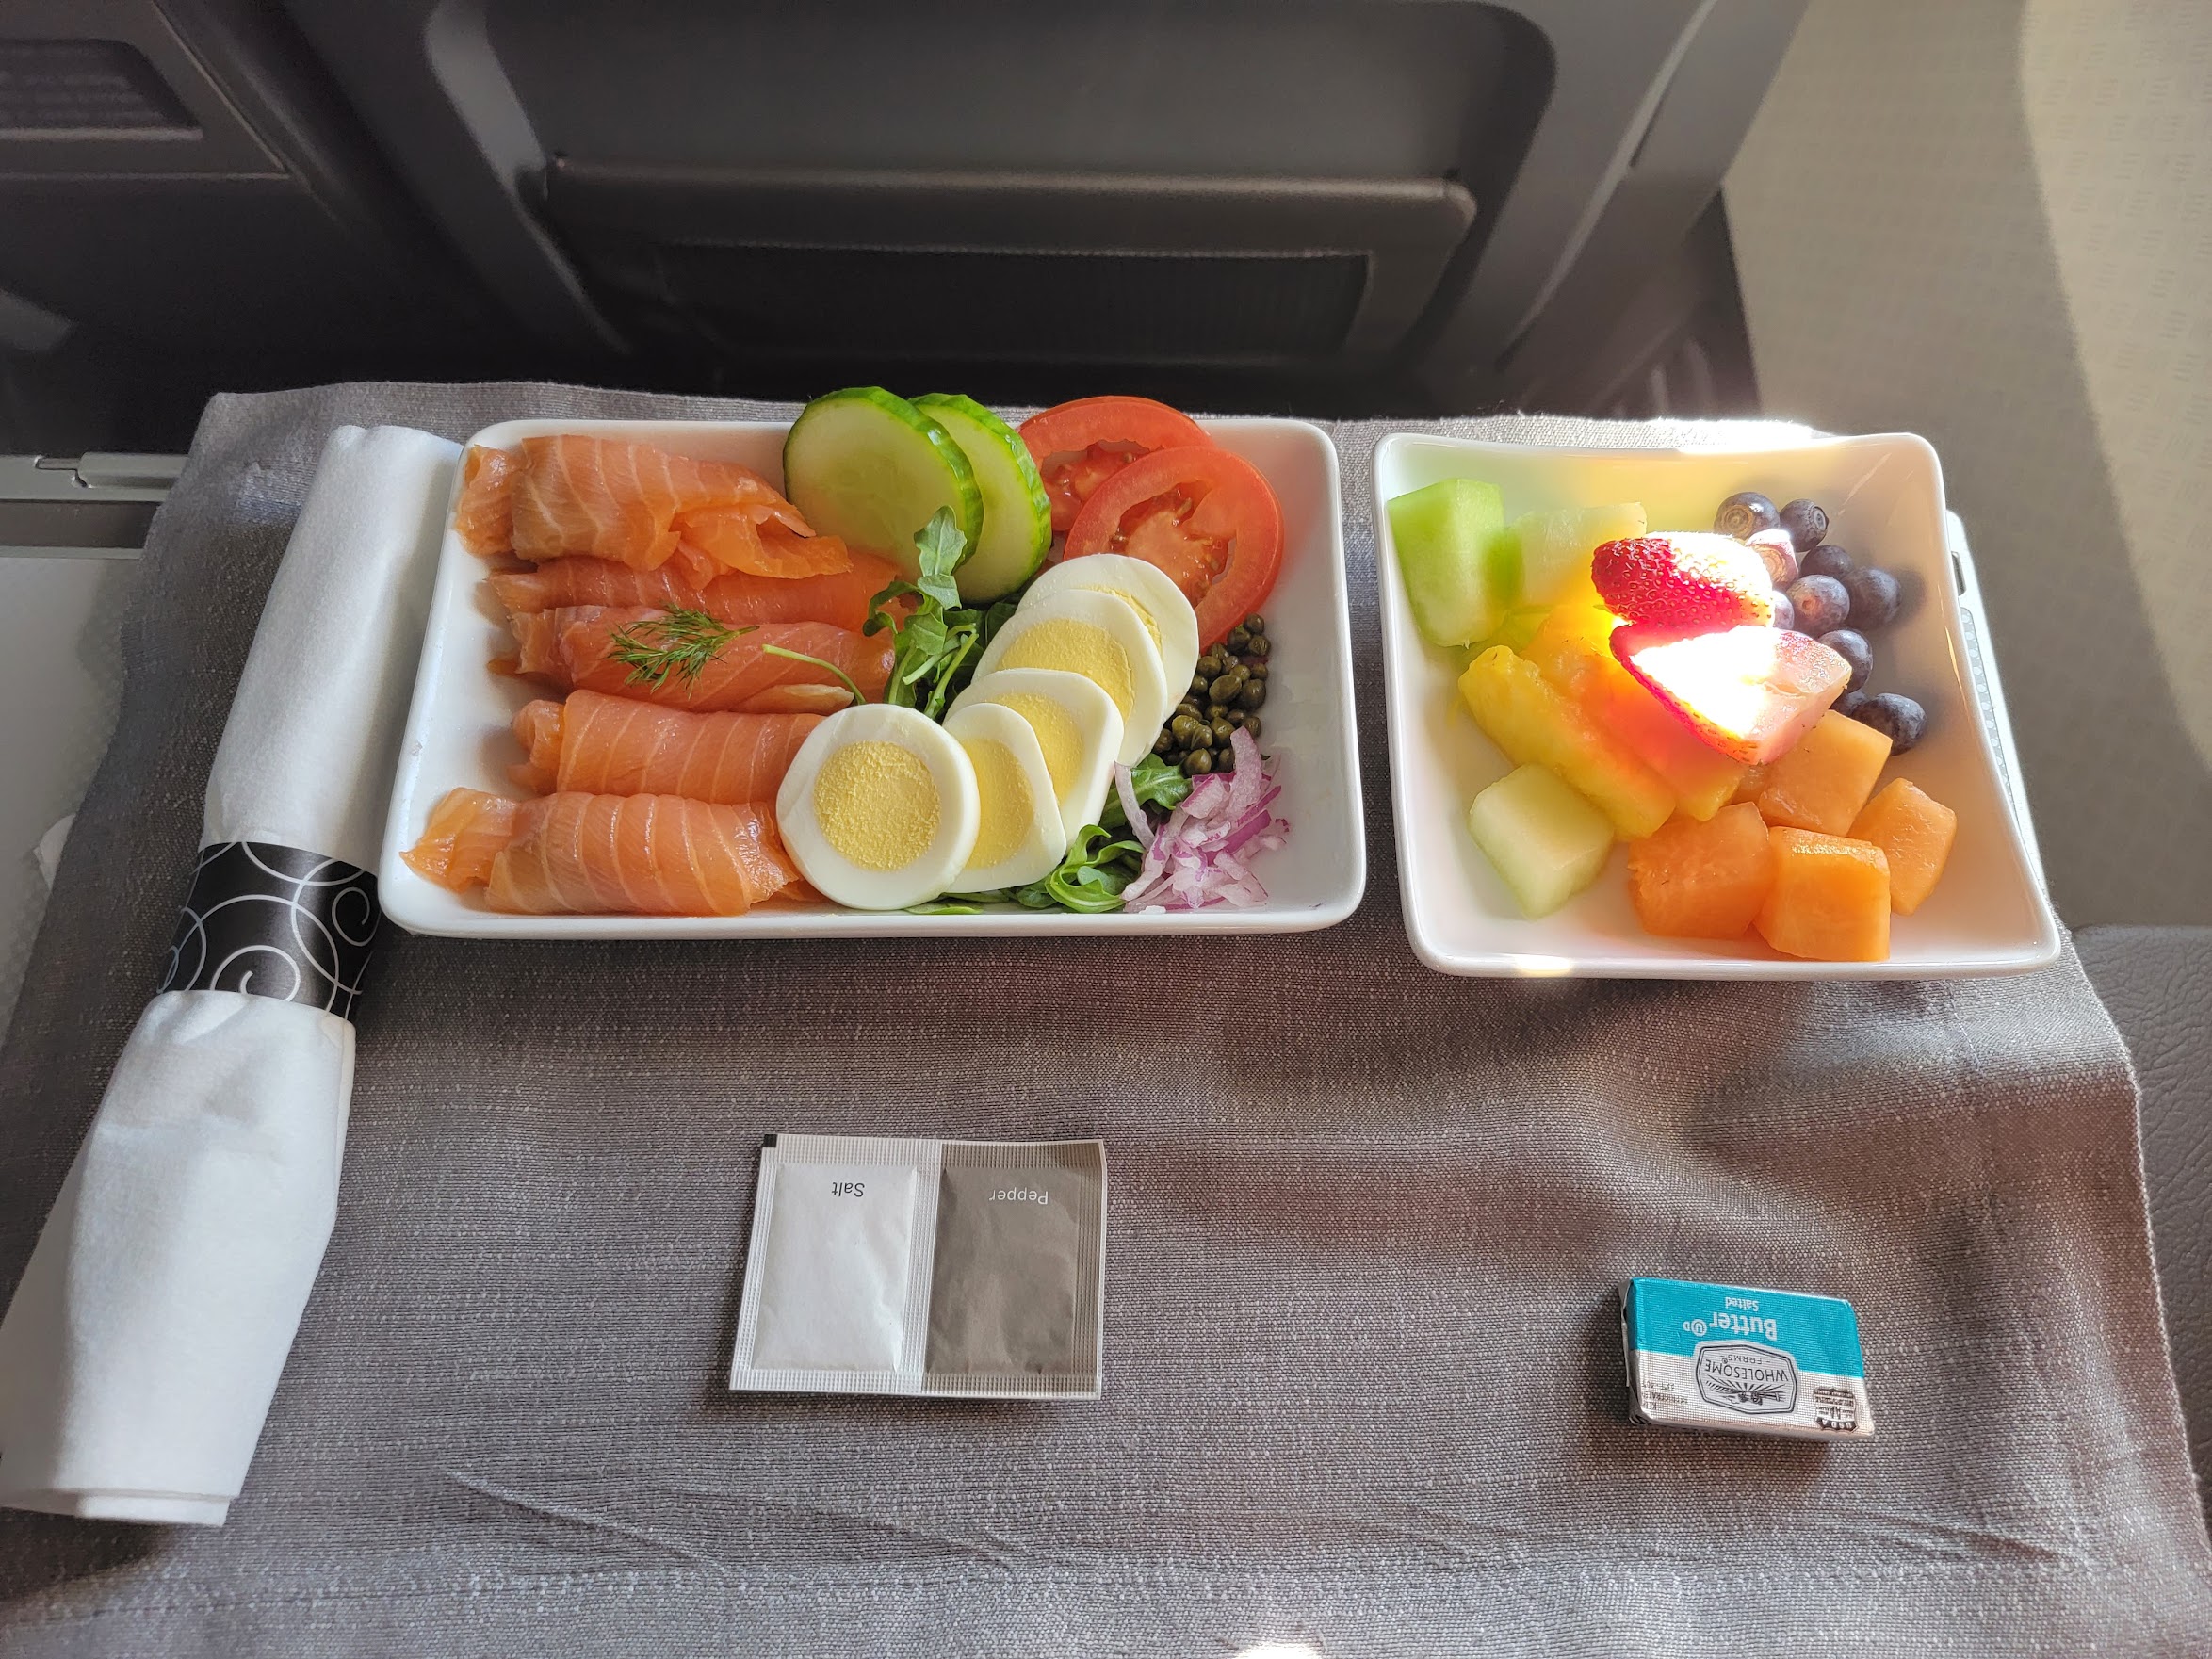 American Airlines Nailed Domestic First Class Breakfast In A Way Few Airlines Do